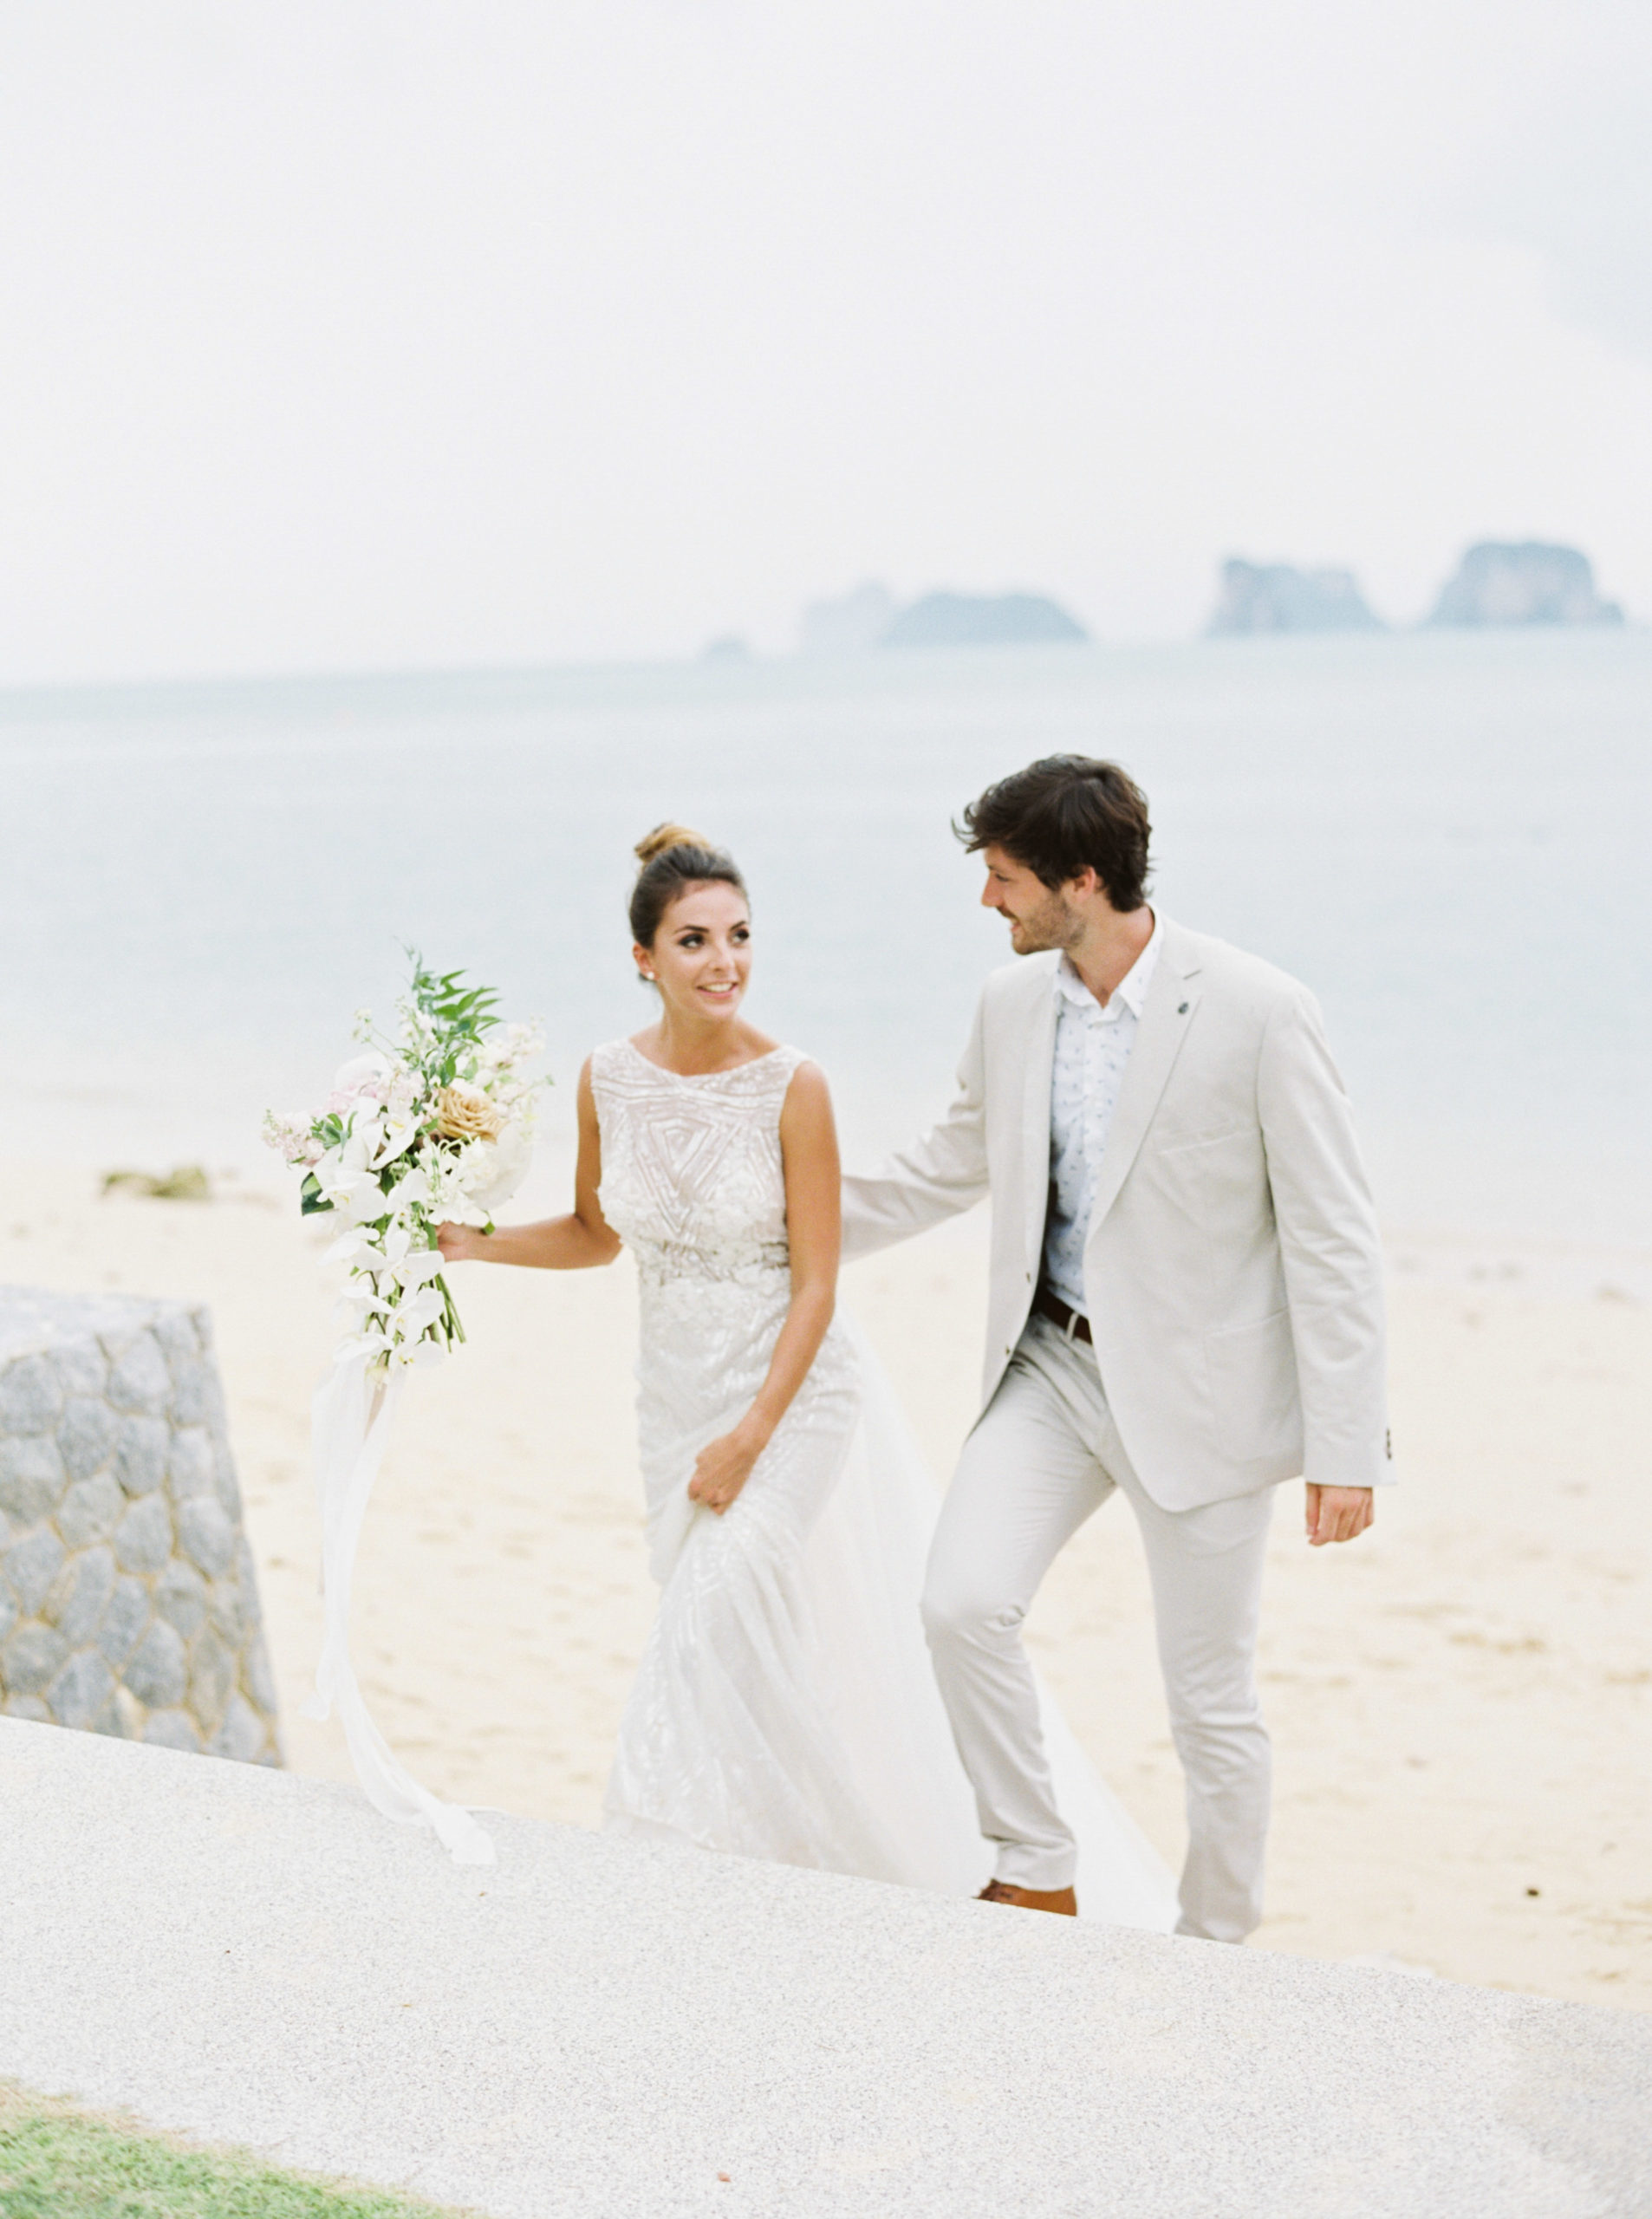 Bride and groom beach attire.jpg - Grooms natural, linen suit for outdoor beach wedding in Thailand Bride and groom portrait at Coffs Harbour Byron Bay